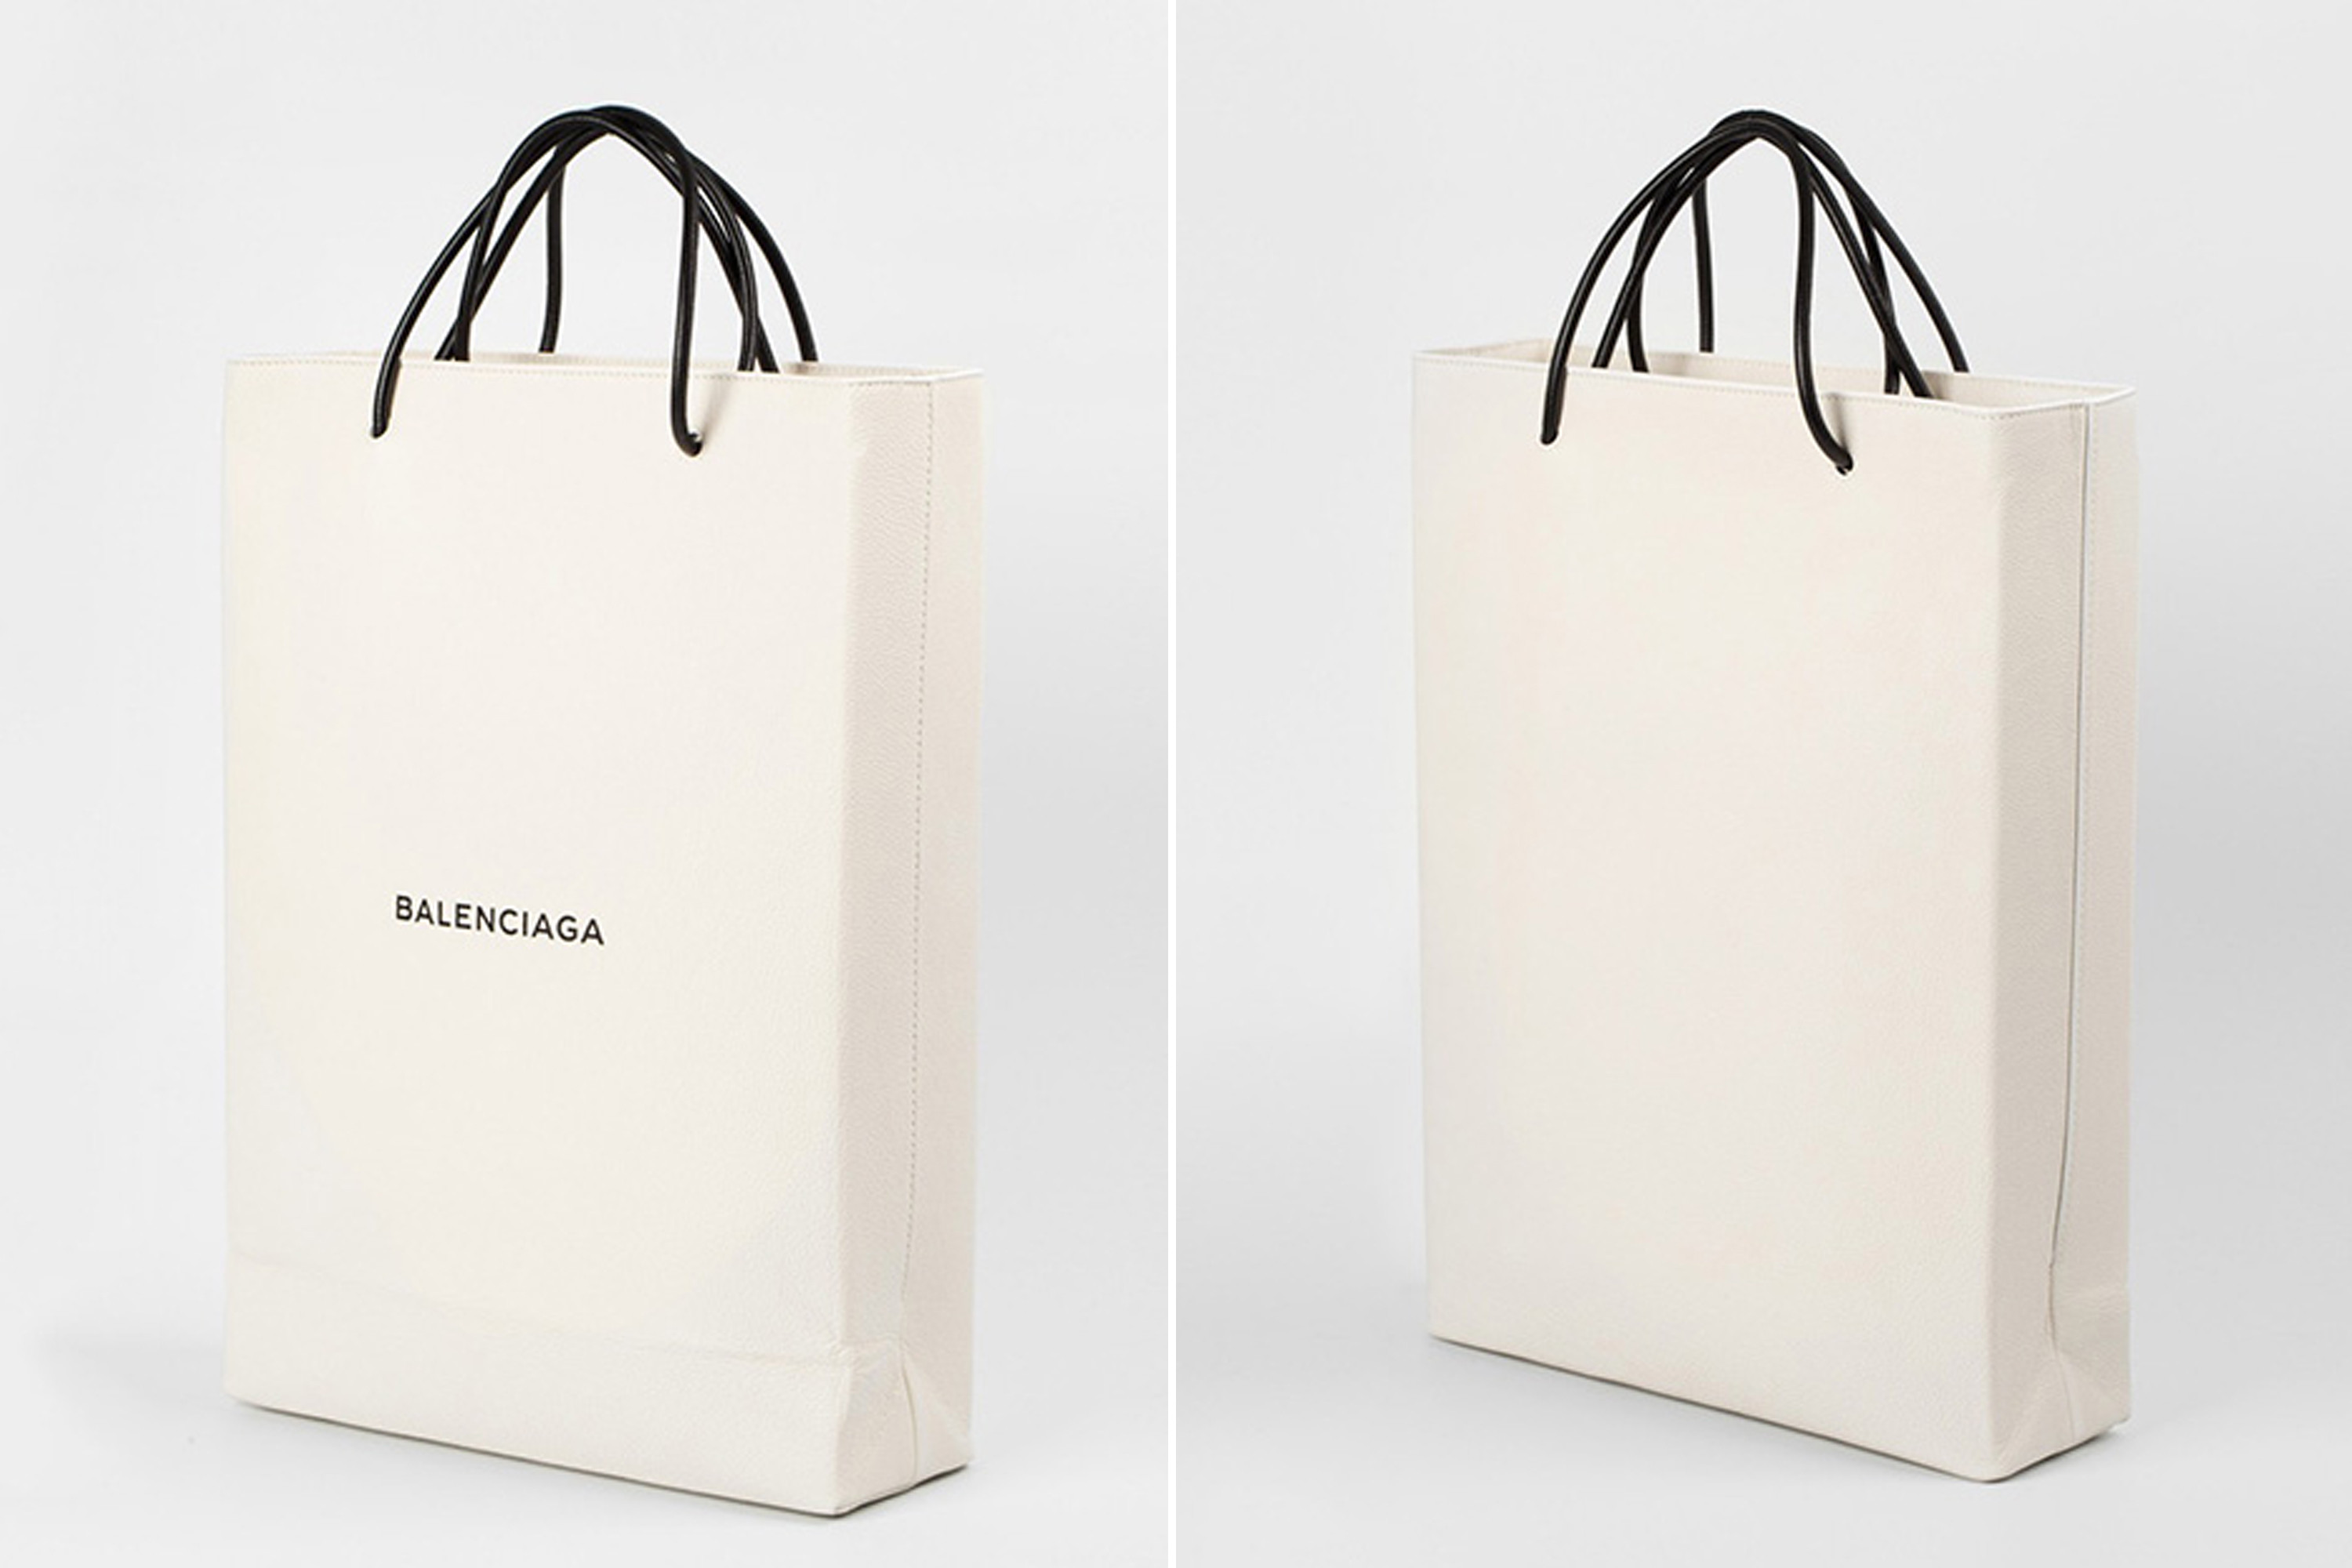 This $1,100 shopping bag has already sold out